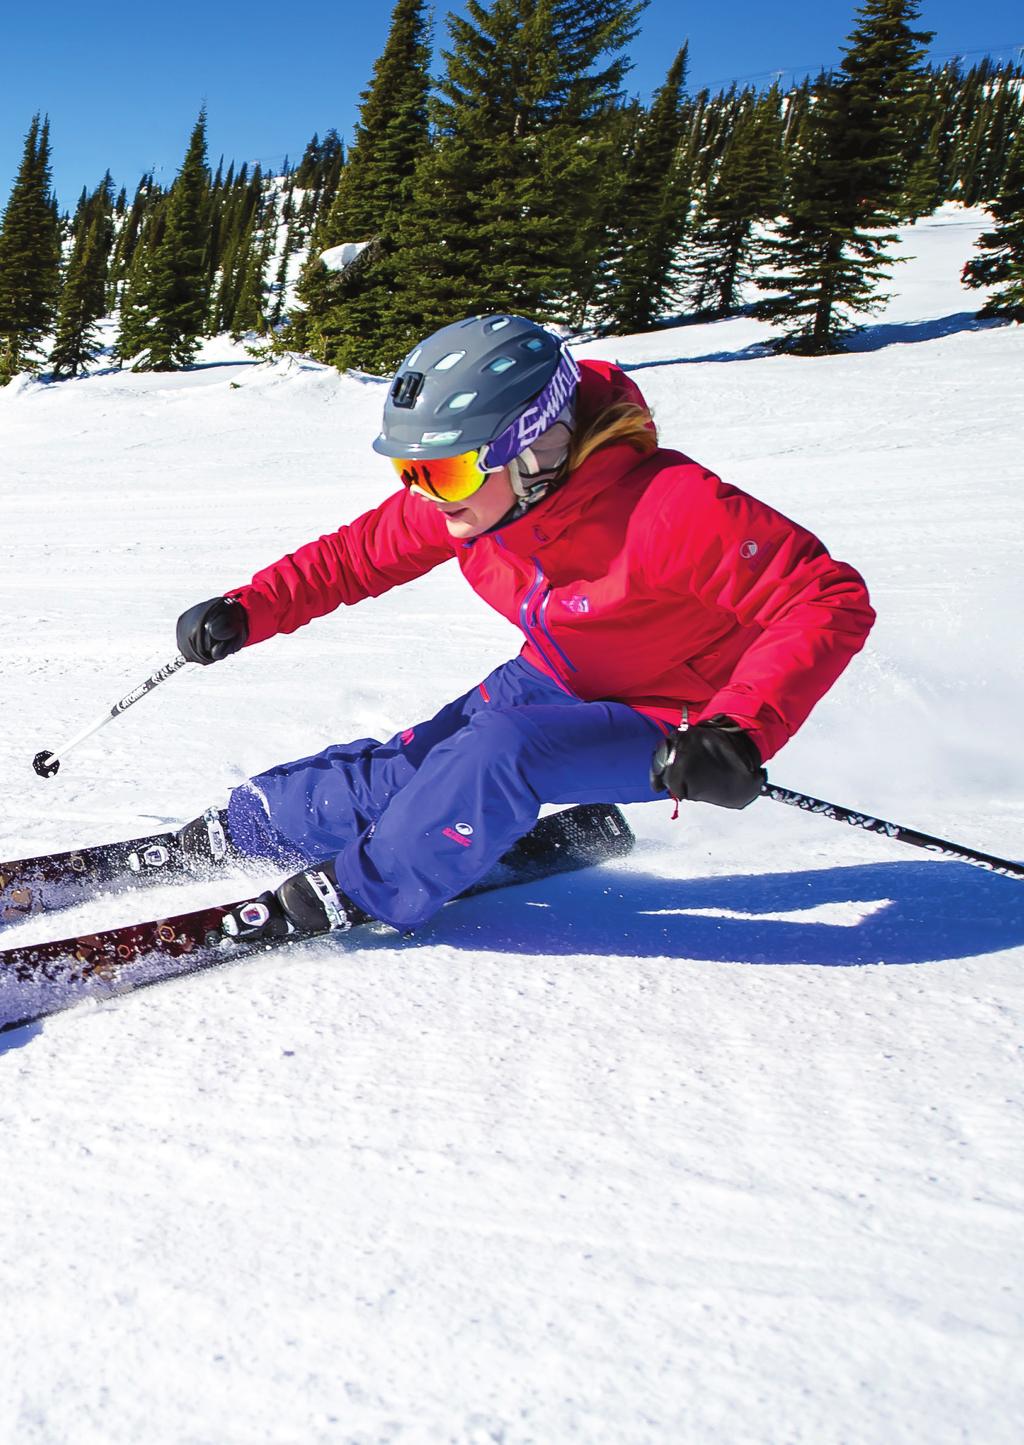 At Big White Ski Resort we are proud of our reputation for providing quality group trips at exceptional value.